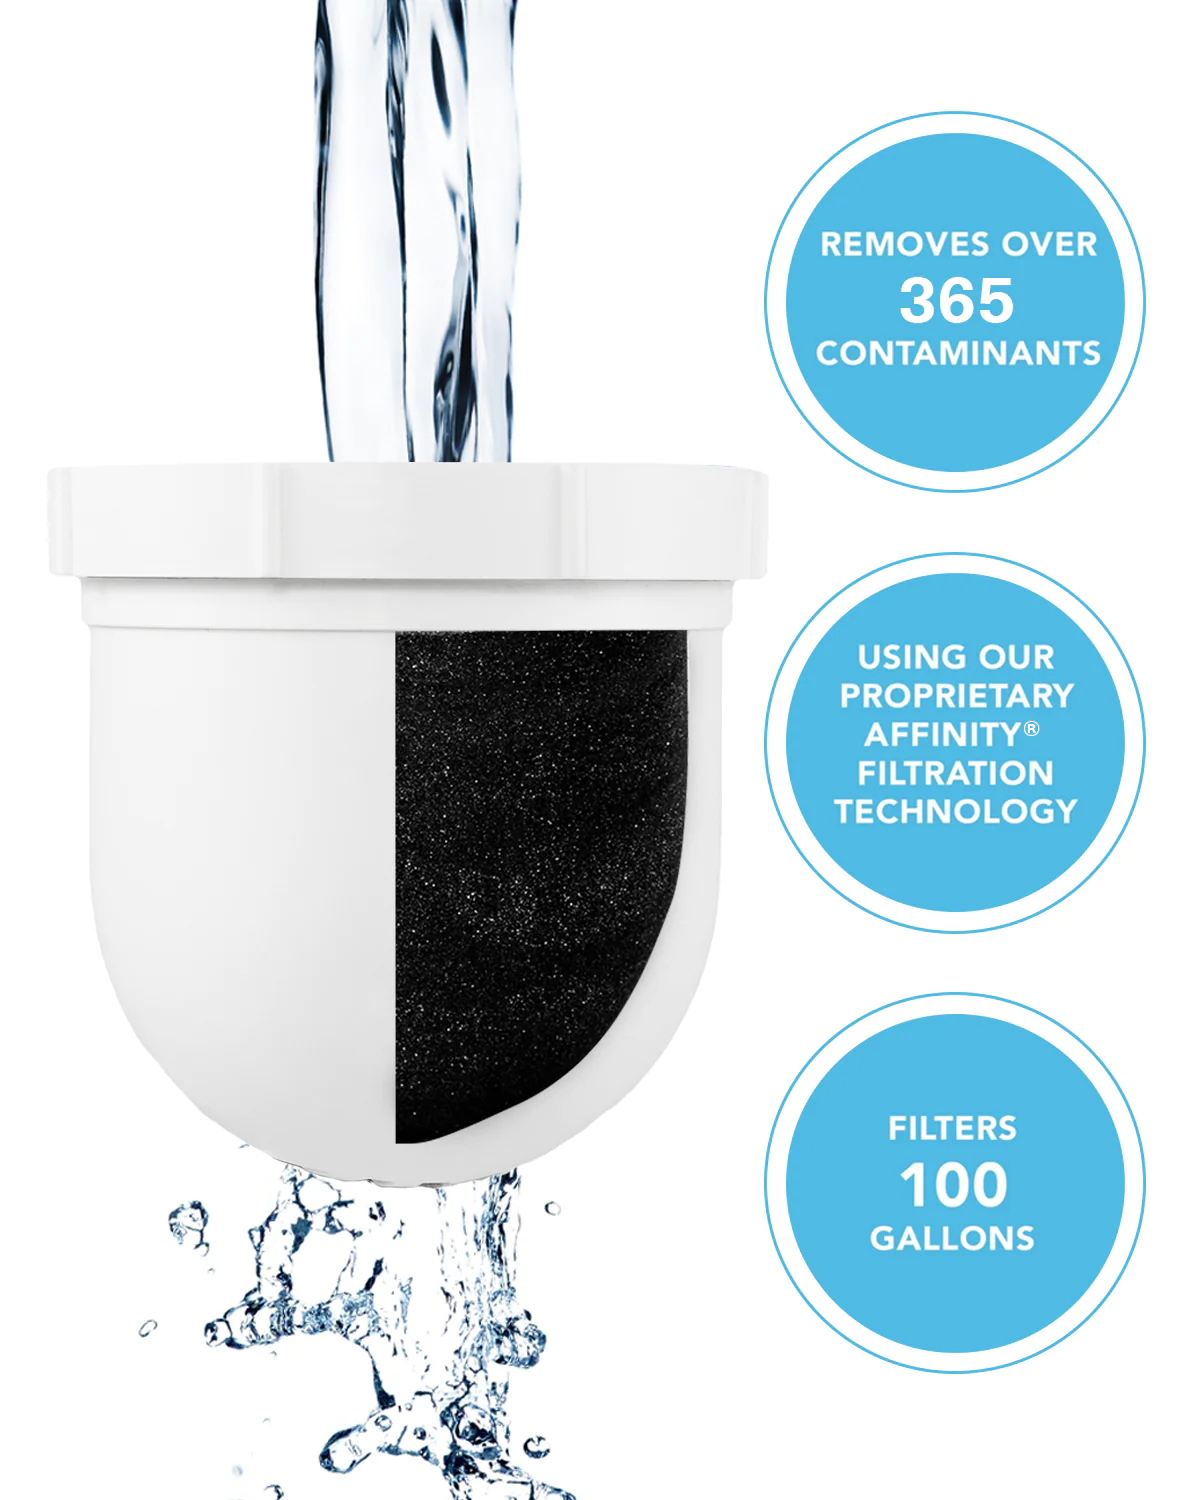 Clearly Filtered Water Filter Pitcher